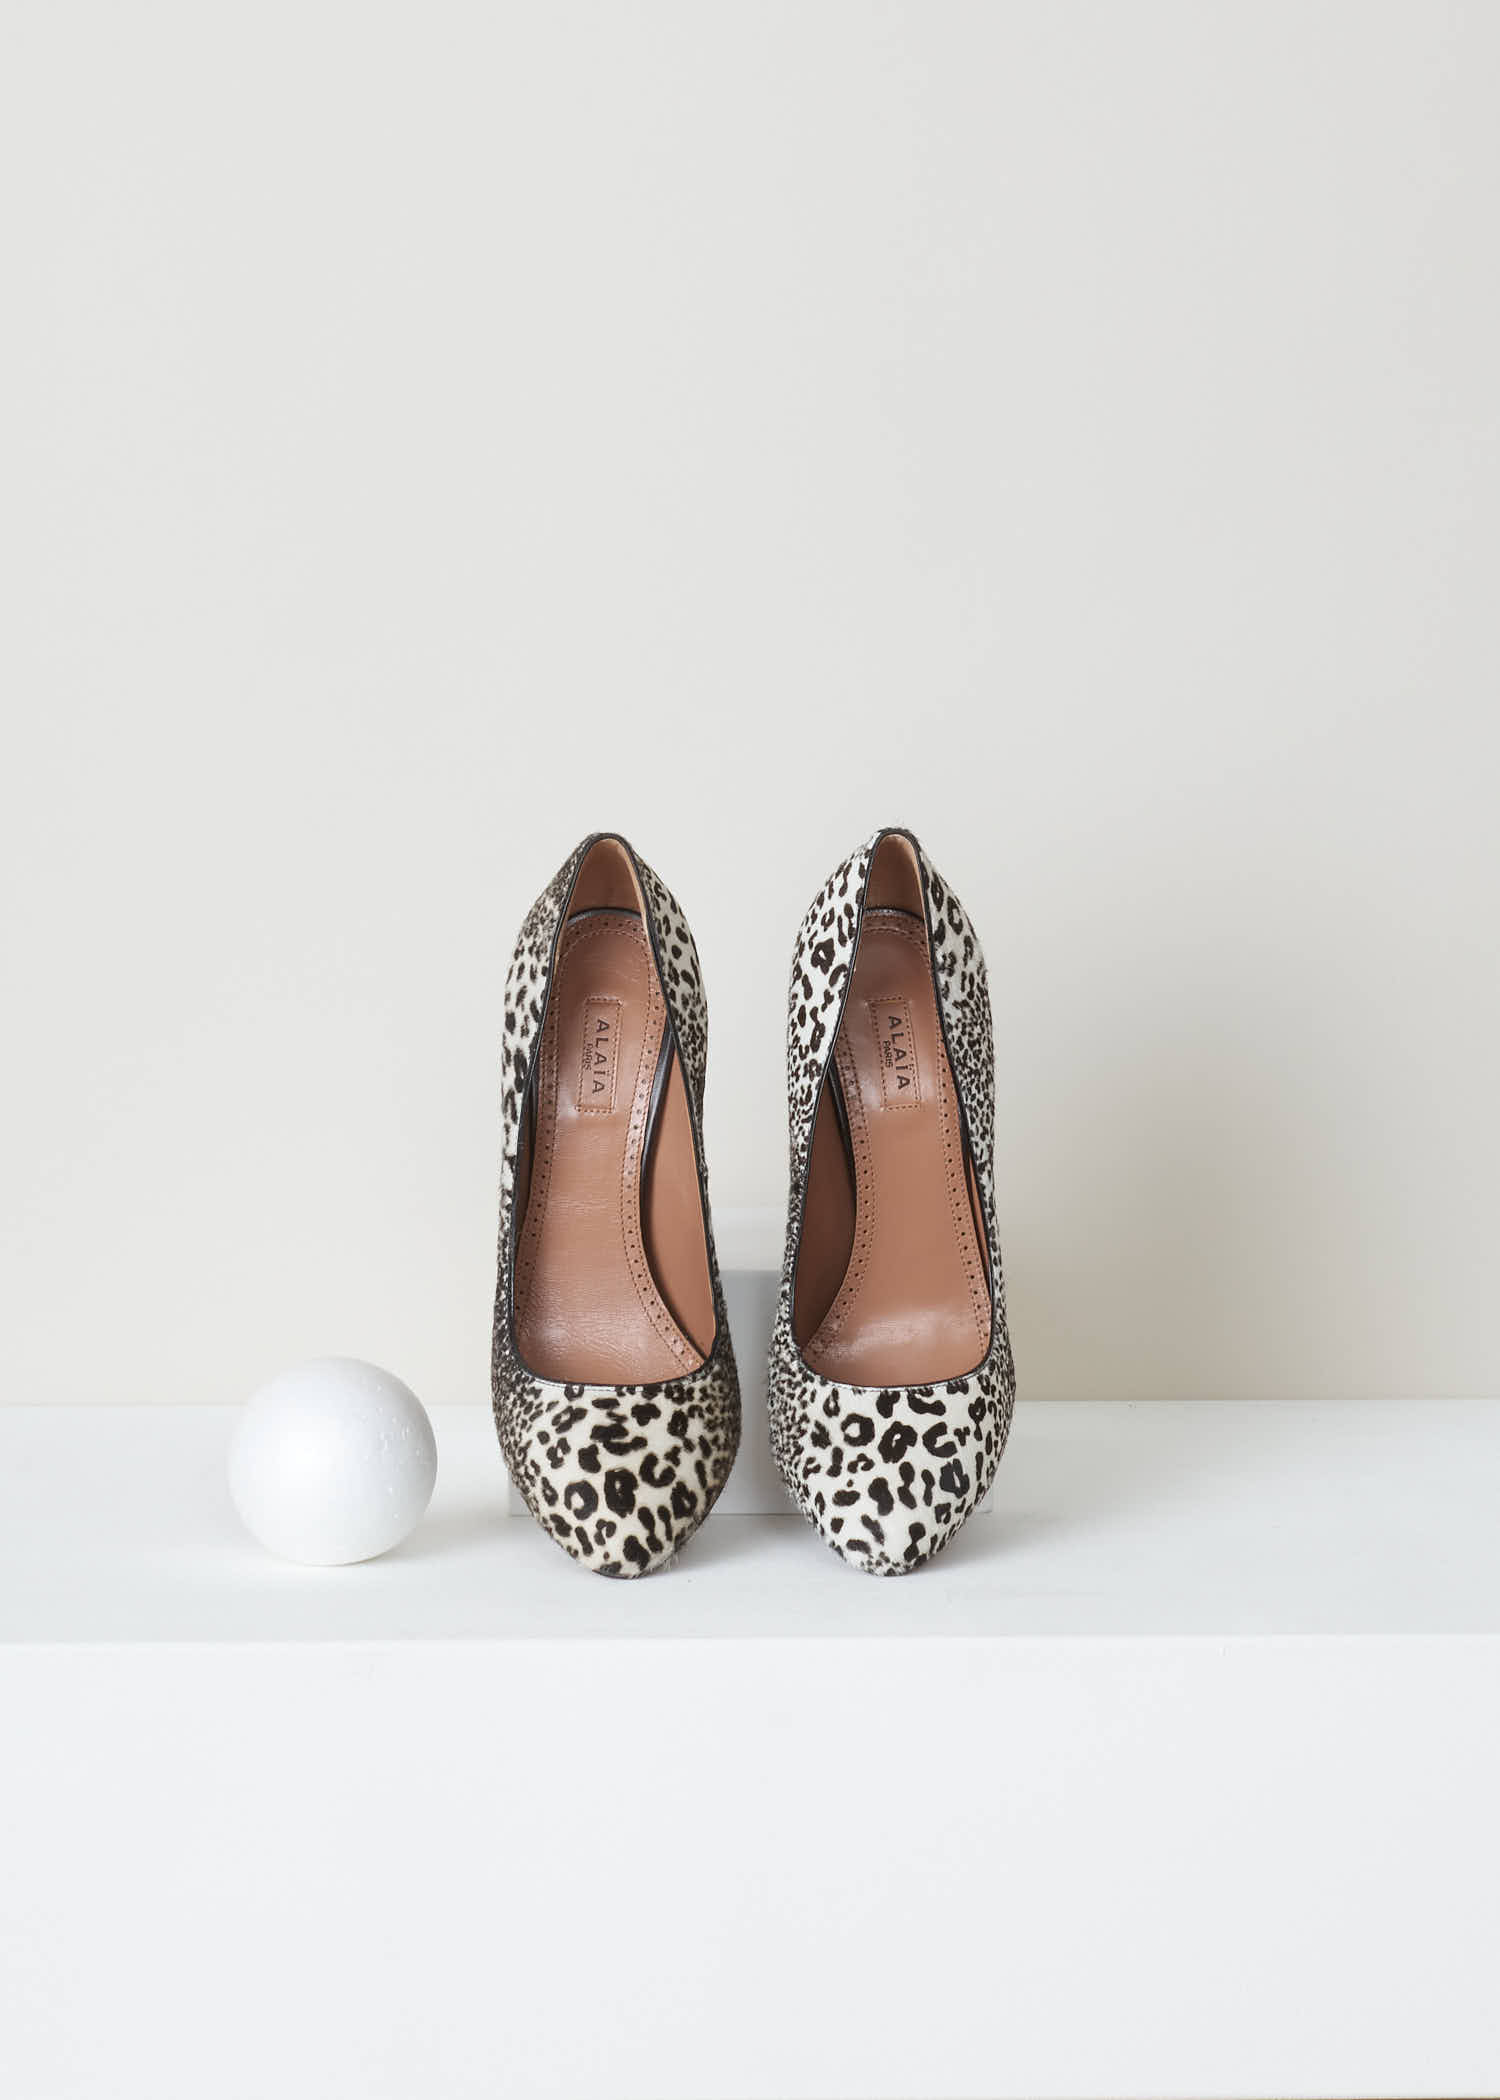 AlaÃ¯a,hairon leather pump, 3W3I324CL05, print, Hairon leather pump in leopard pattern. Blanc noir pony skin leather with rounded nose and leather covered high heels.